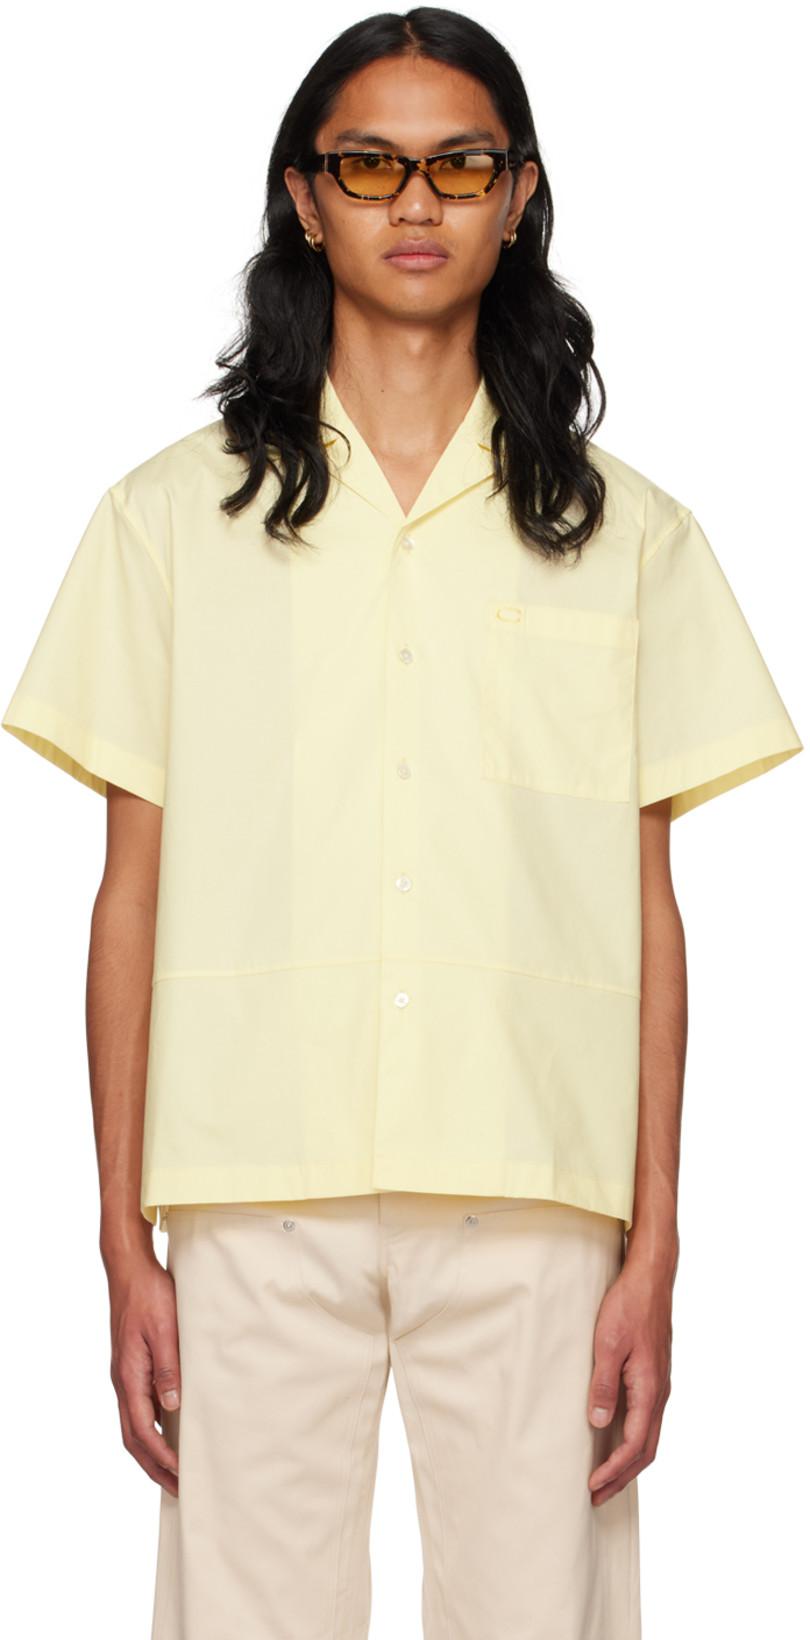 SSENSE Exclusive Yellow Uniform Shirt by COMMISSION